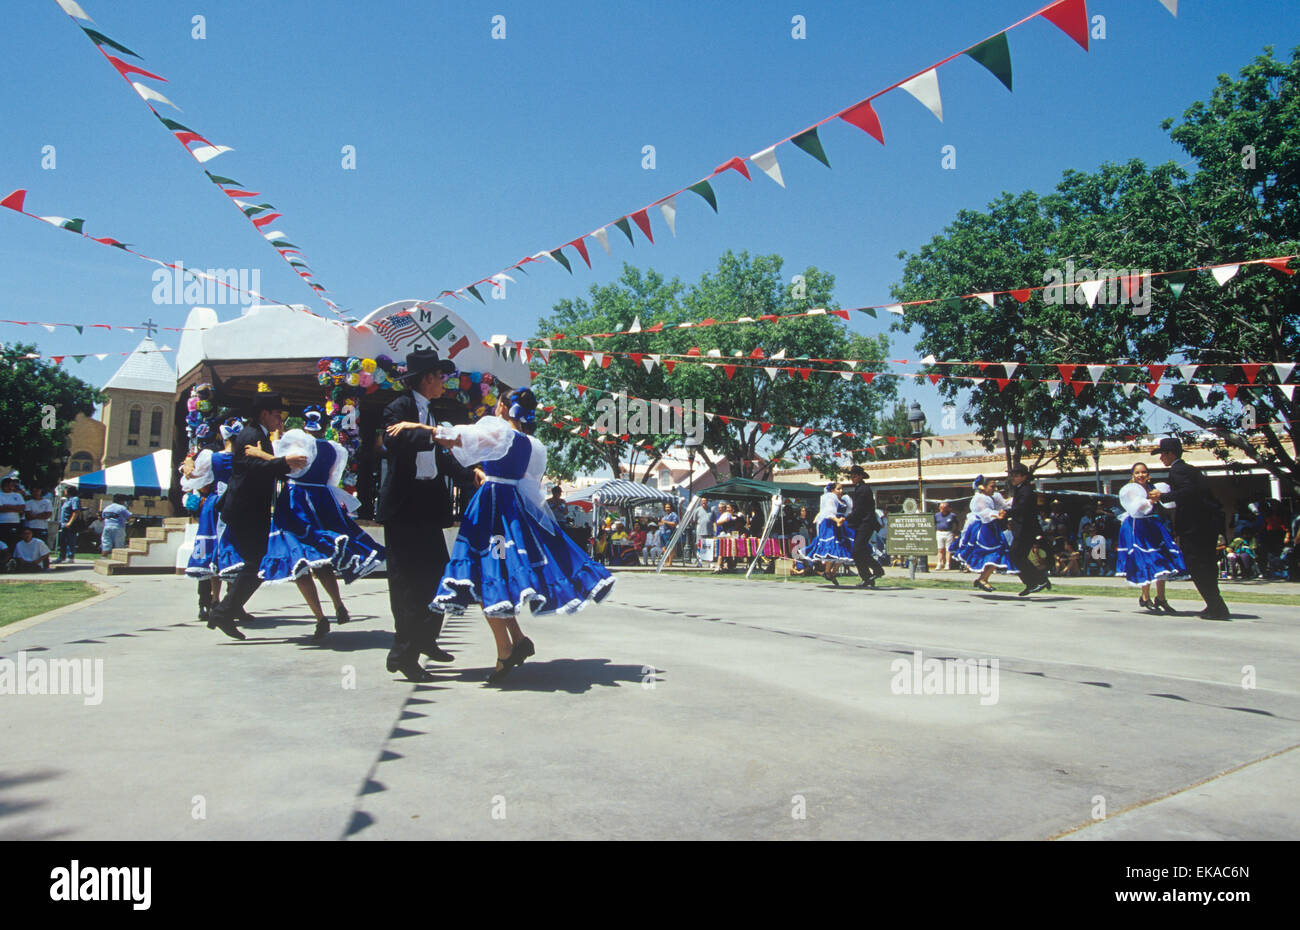 The old Mesilla Plaza is the scene of frequent fiestas and celebrations, Mesilla, New Mexico, USA. Stock Photo